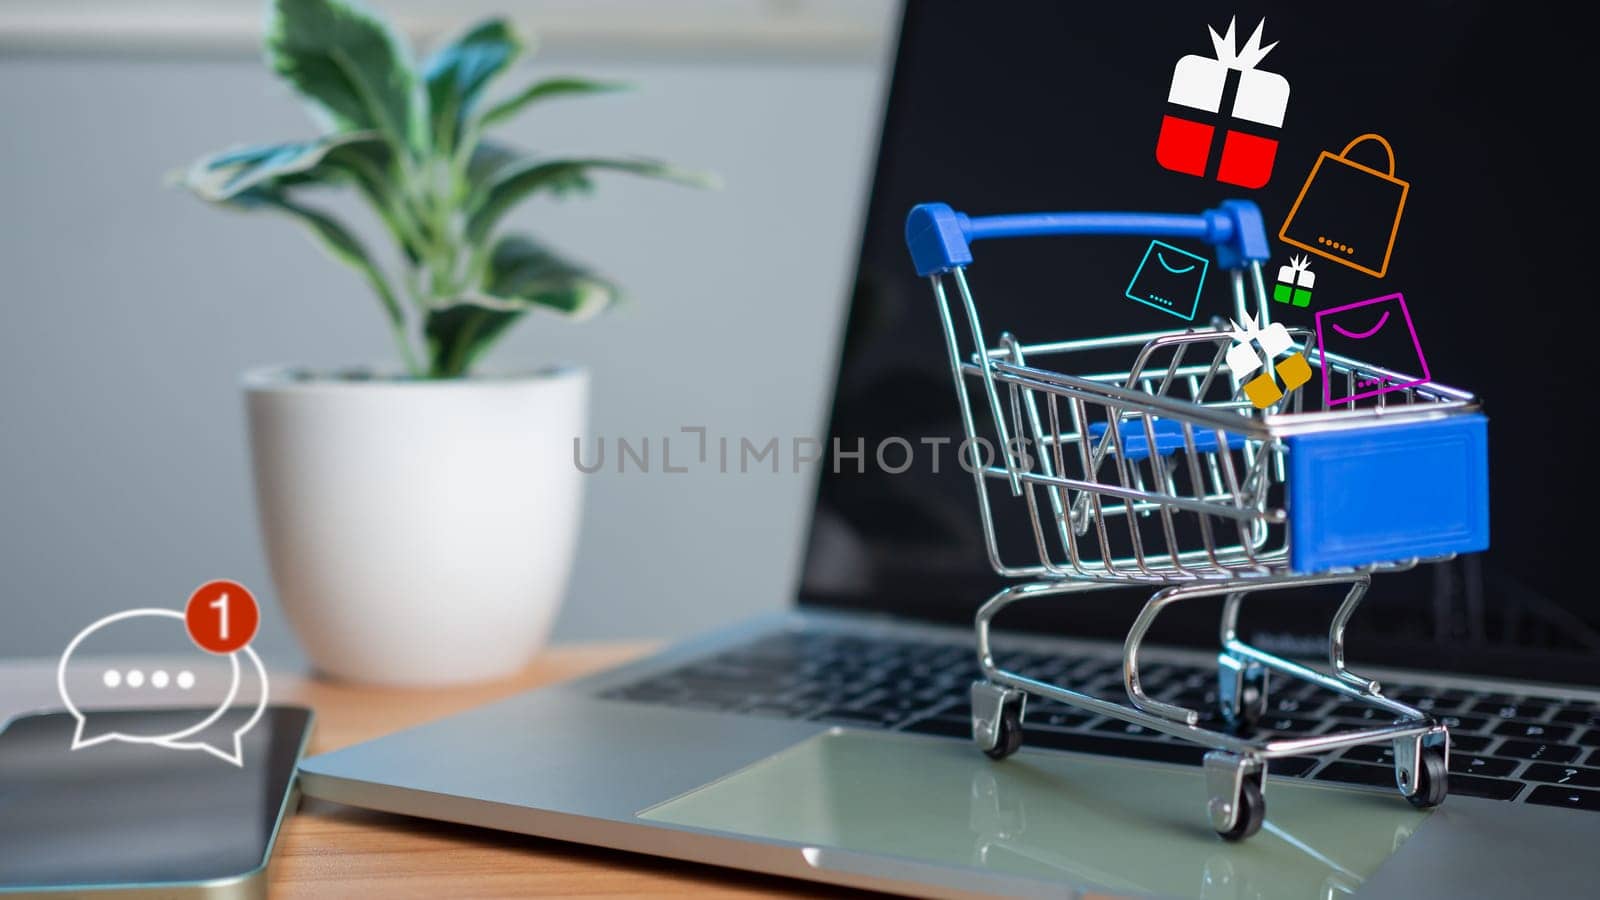 Shopping cart and gift box icons placed on laptop computer represent  online shopping concept, website, e-commerce, market platform, technology, , shipping, logistics and online payment concept. by Unimages2527